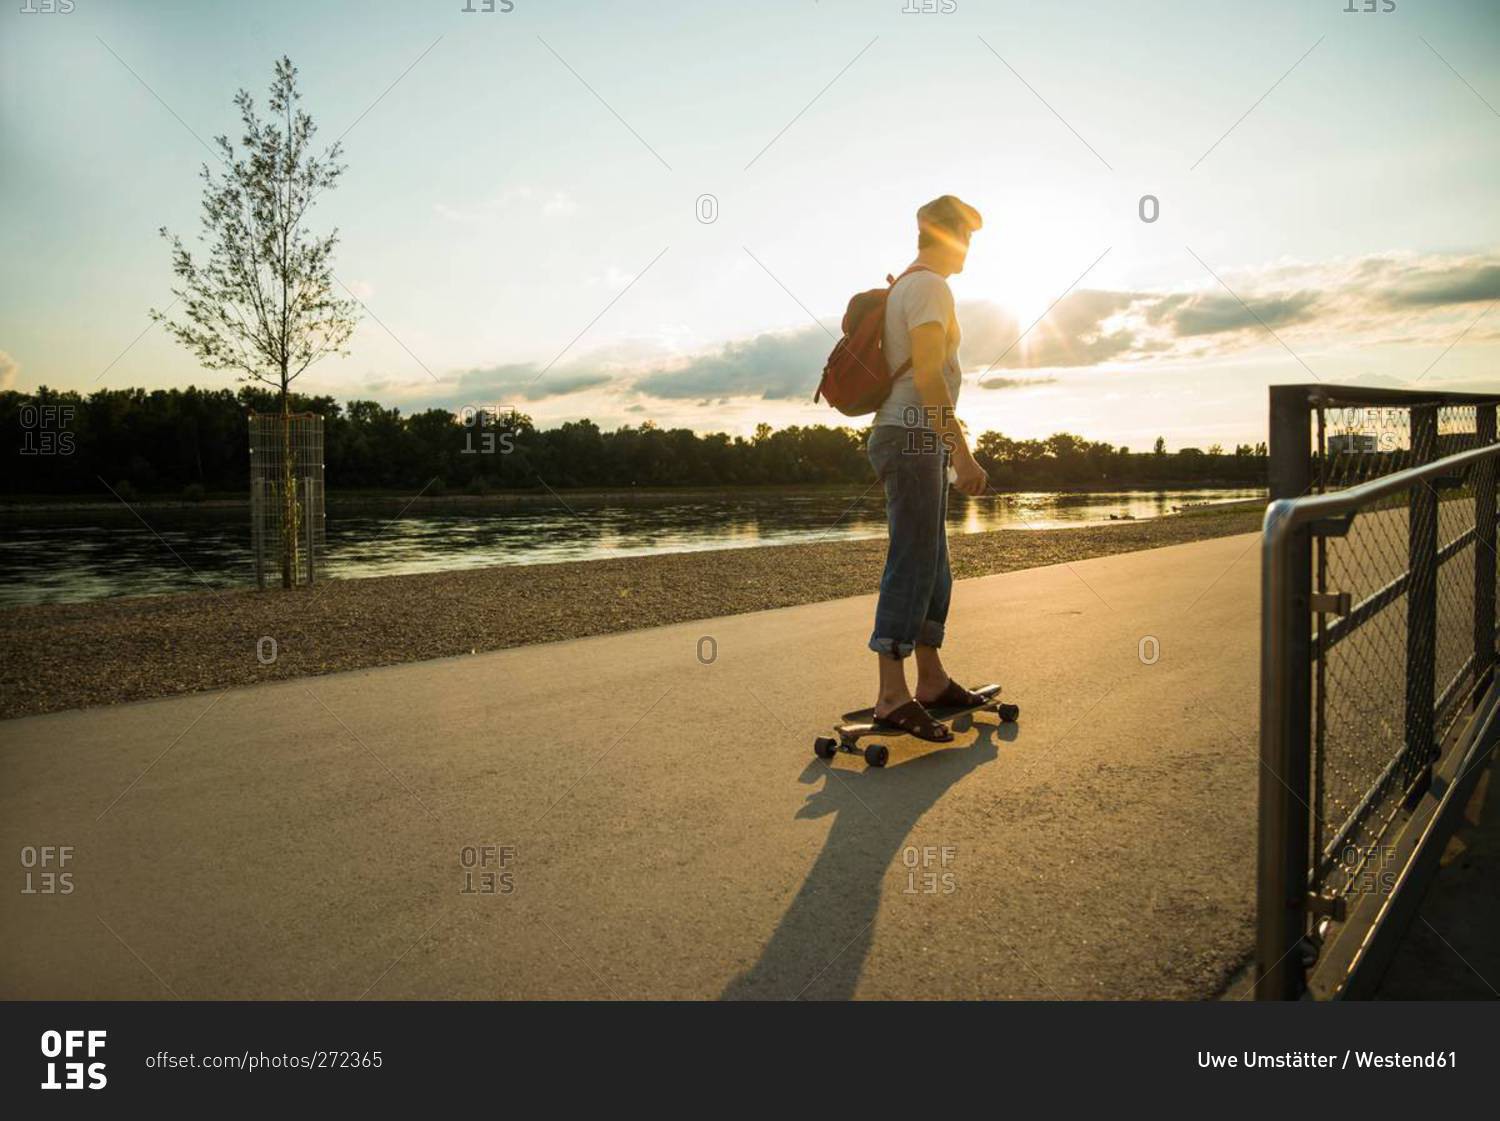 Man standing on skateboard in the evening twilight